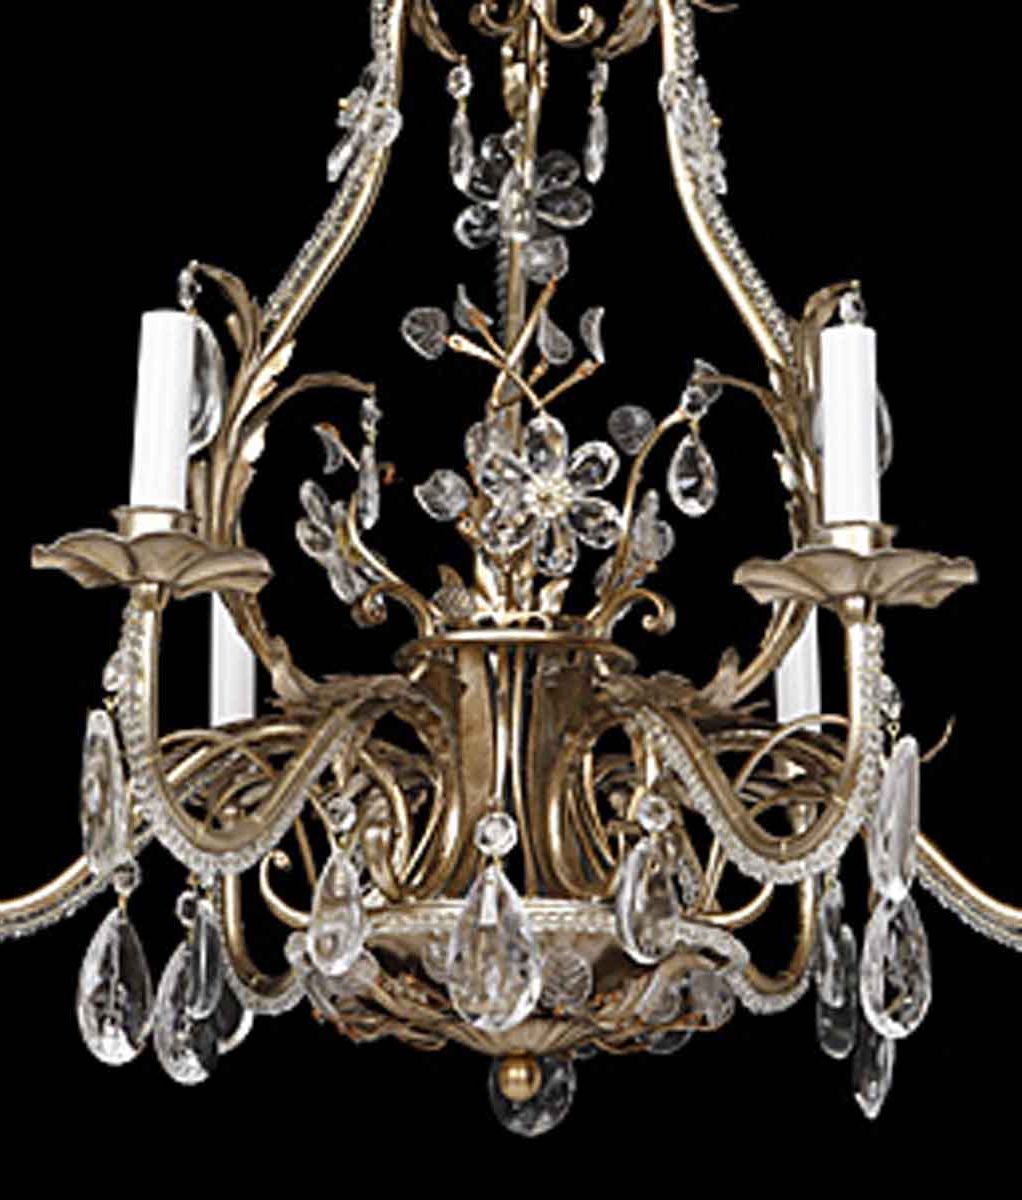 Soft Gold Crystal Chandeliers With Fashionable Italian Gold Gilt Crystal Chandelier (View 3 of 20)